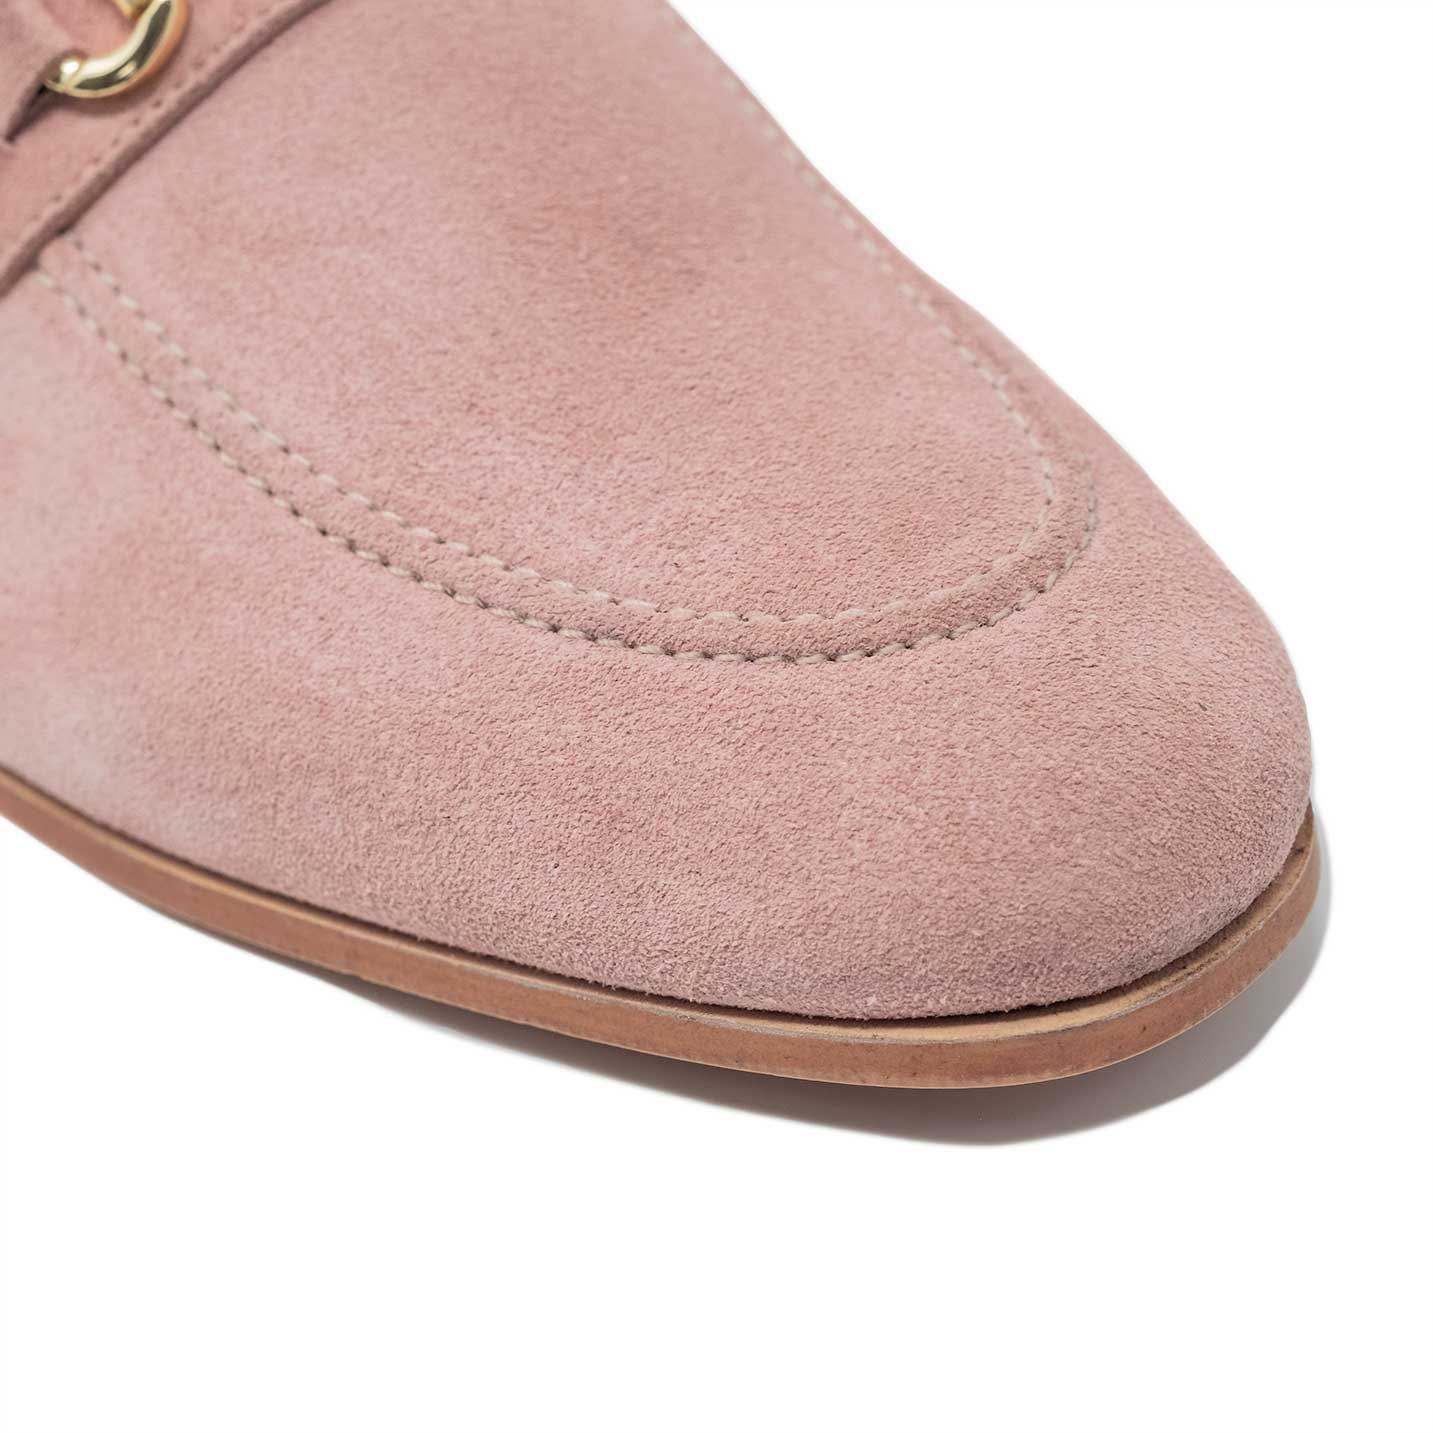 Apron Toe on a Pink Suede Loafer